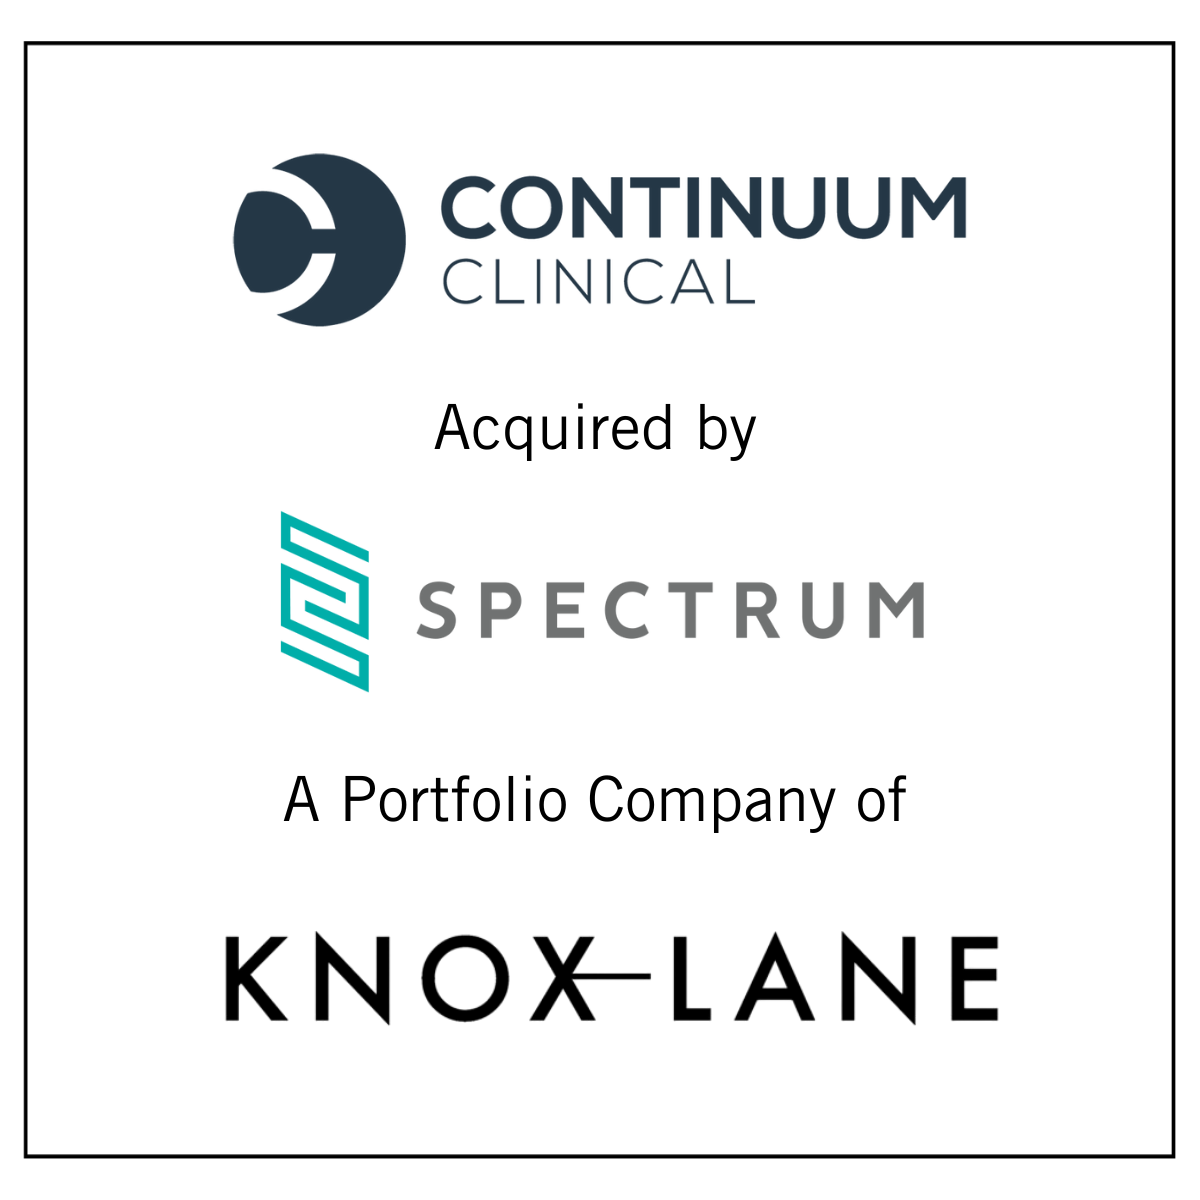 Continuum Clinical, a BC Worldwide company, Acquired by Spectrum Science, a Portfolio Company of Knox Lane, to Bolster Patient Engagement Capabilities